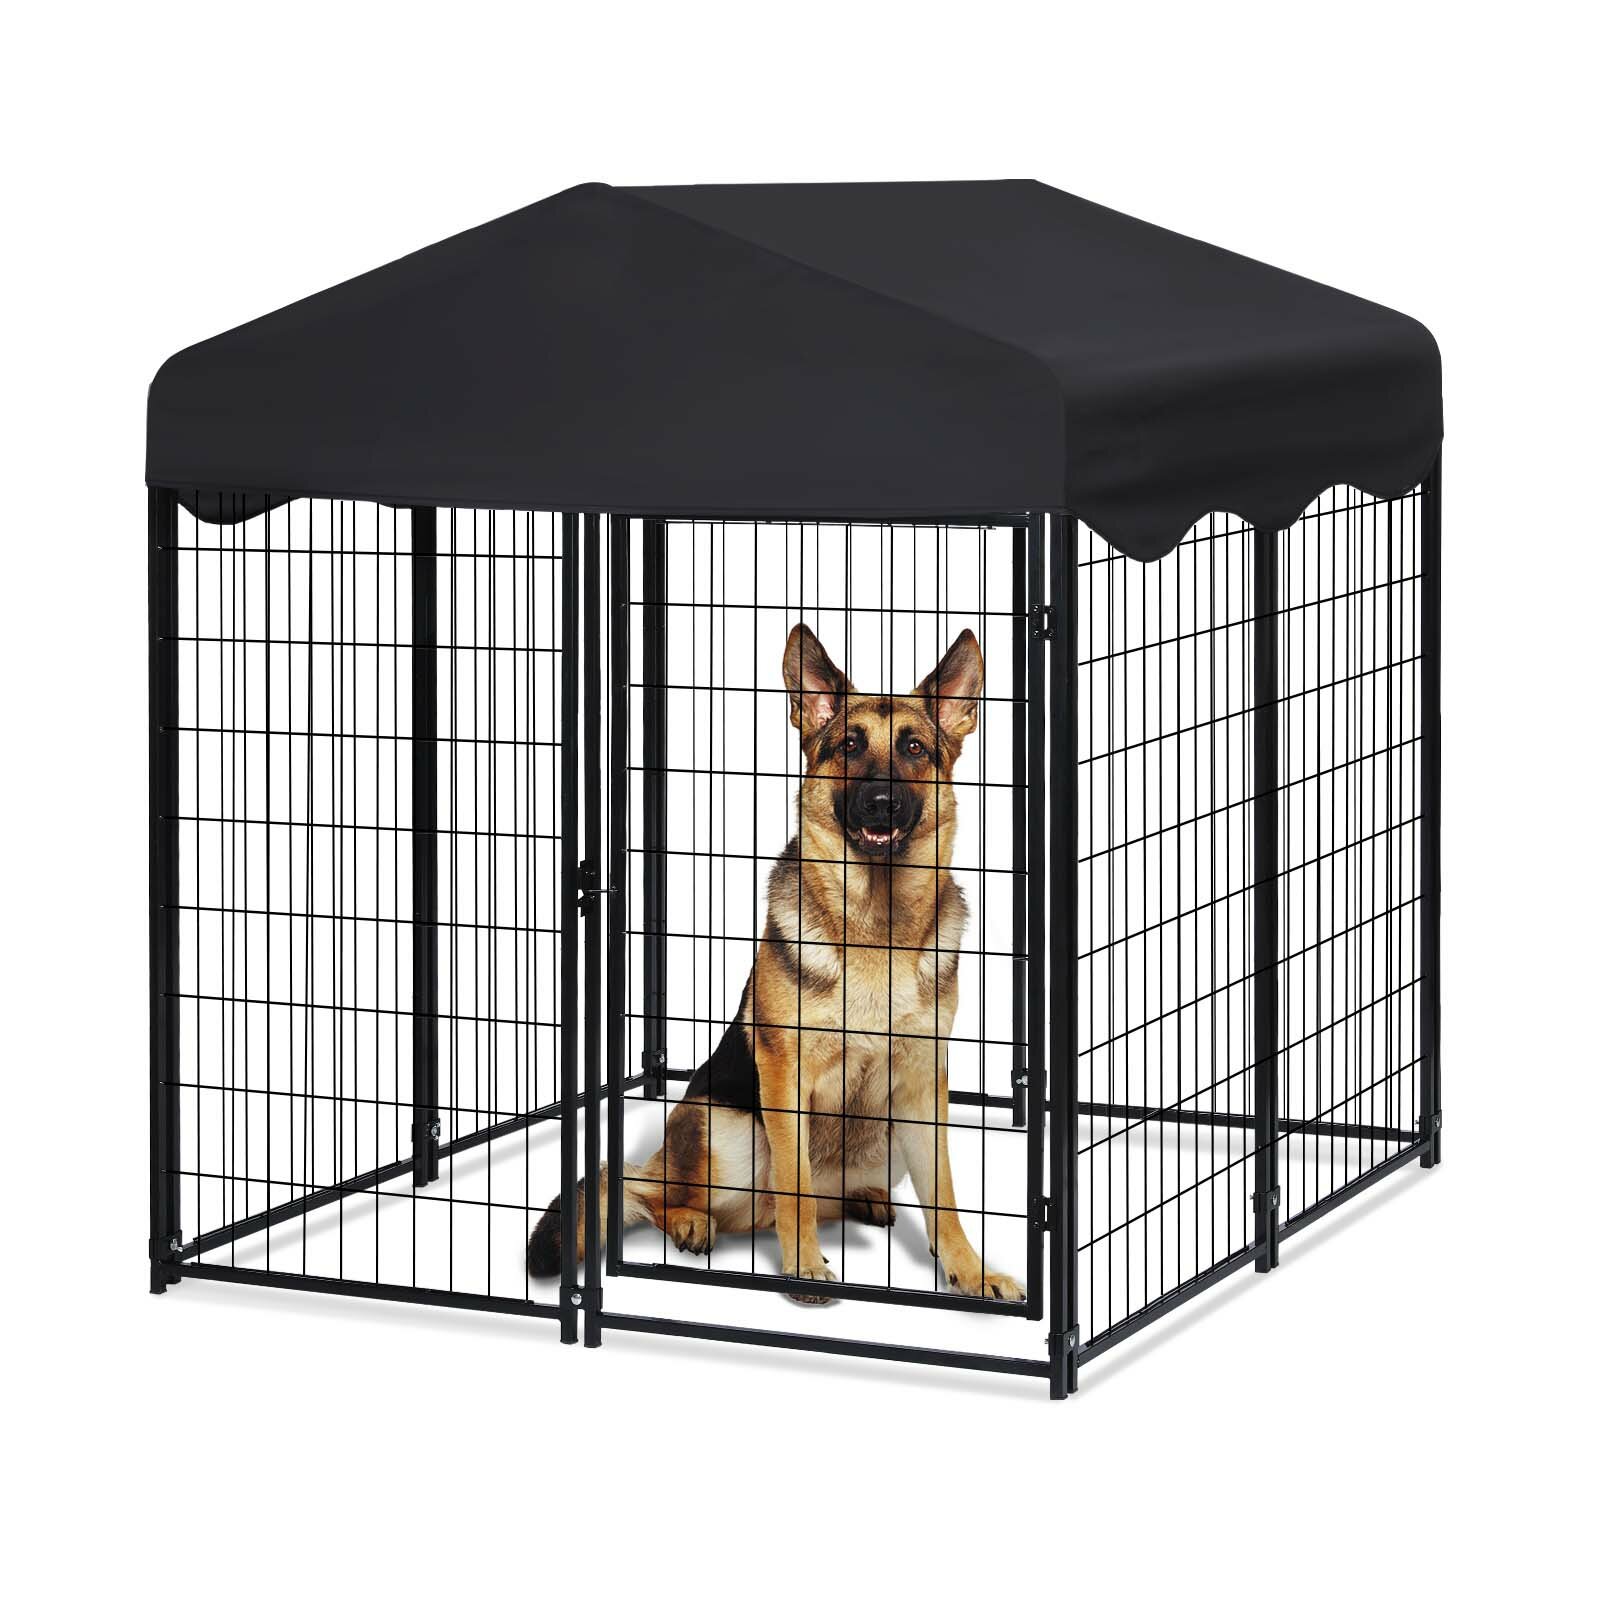 PawGiant Large Dog Kennel Outdoor Dog House with Roof 4ft x 4.2ft x 4.45ft Heavy Duty Metal for Large to Small Dog, Outs